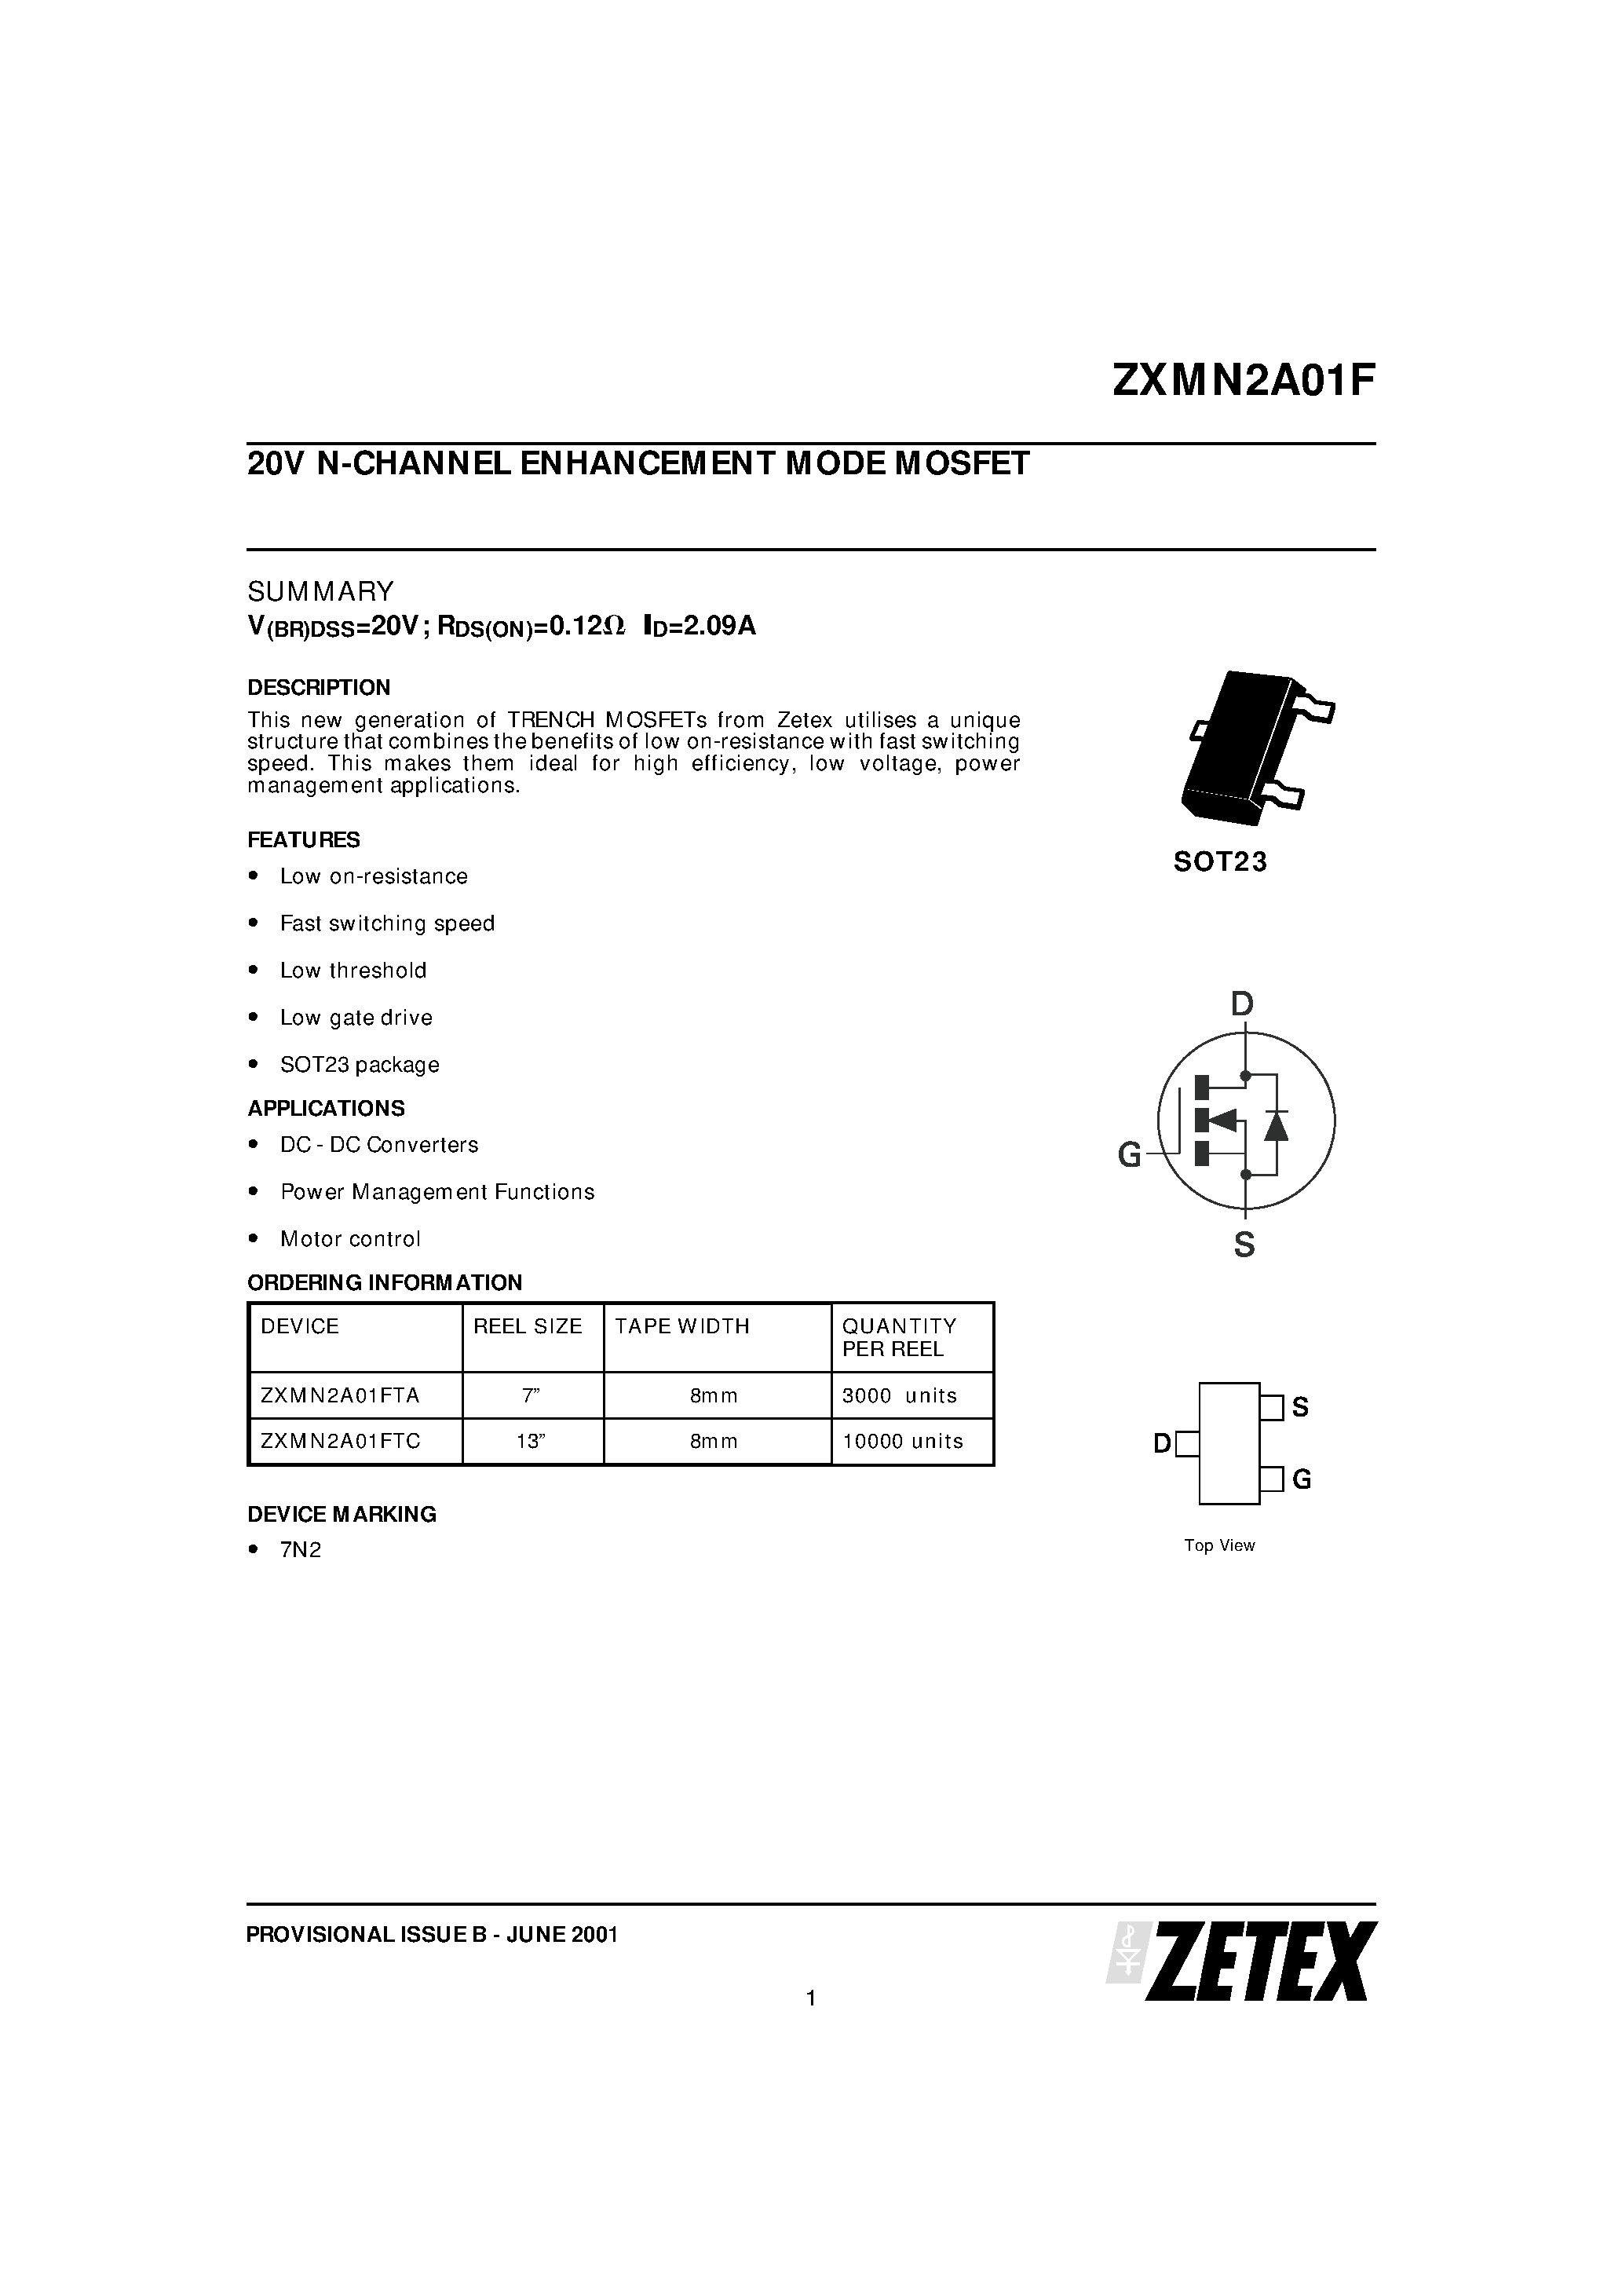 Datasheet ZXMN2A01F - 20V N-CHANNEL ENHANCEMENT MODE MOSFET page 1